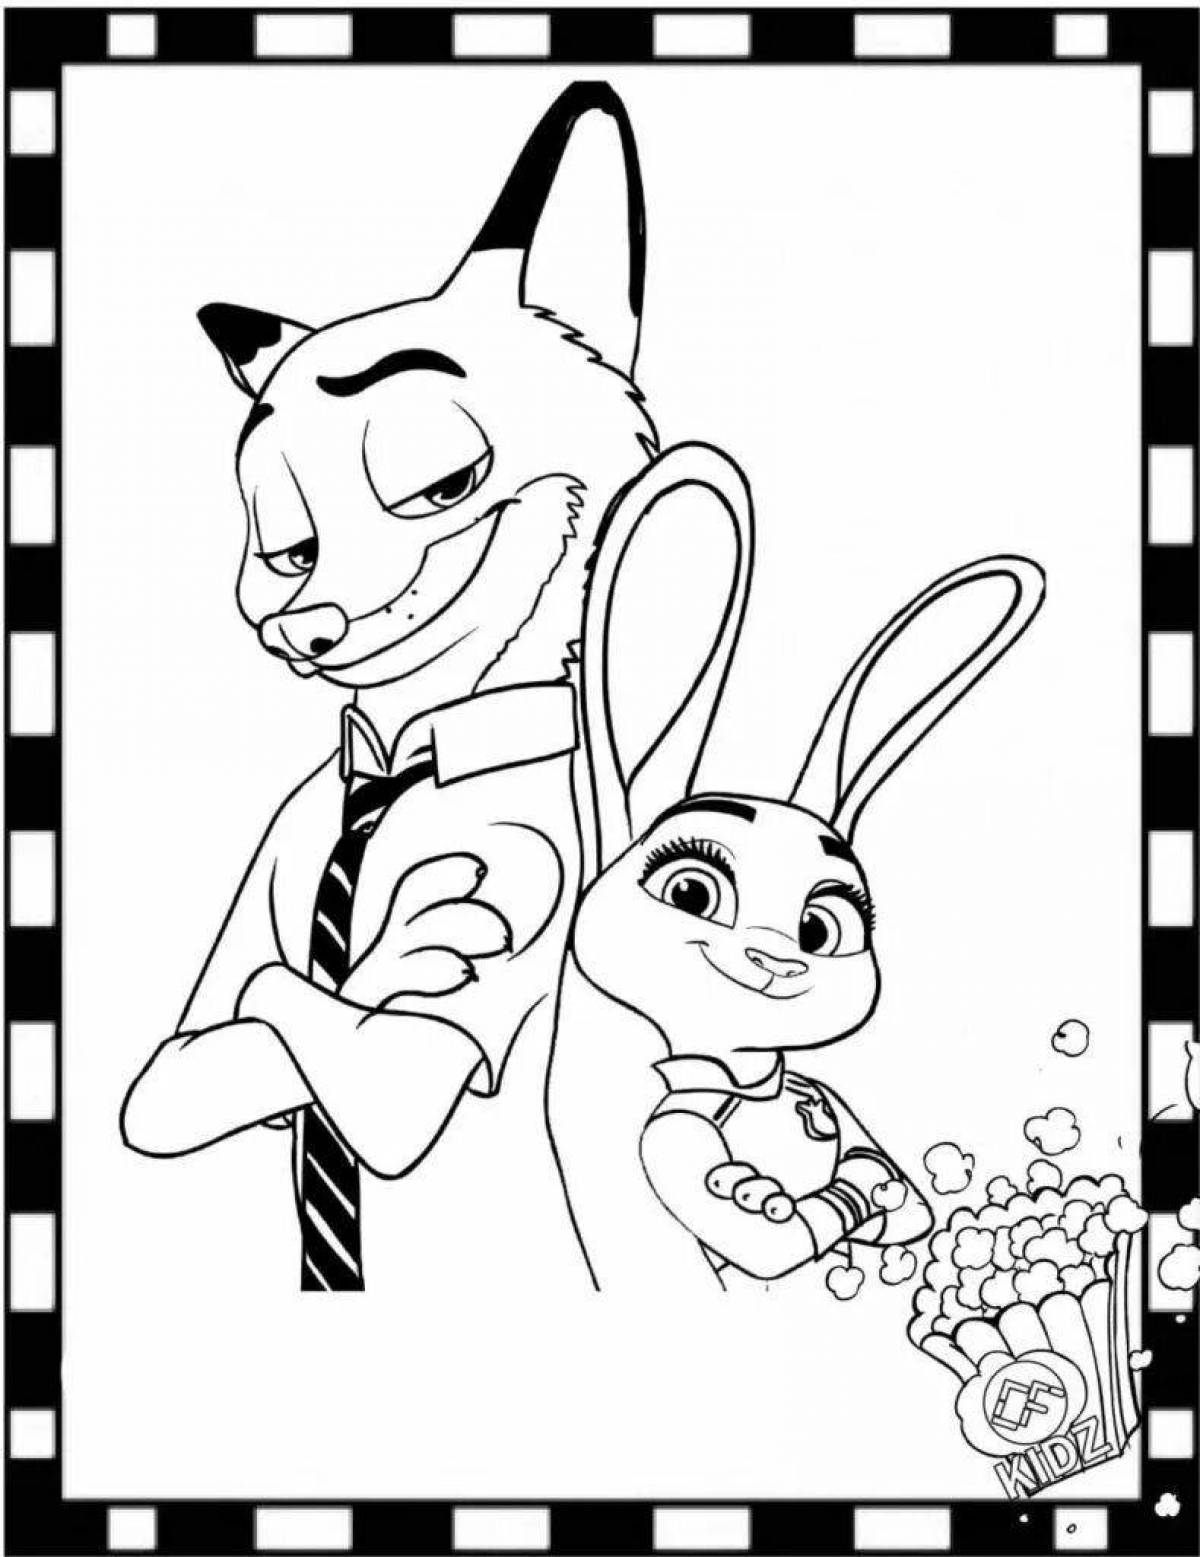 Quirky fluffy spy coloring book